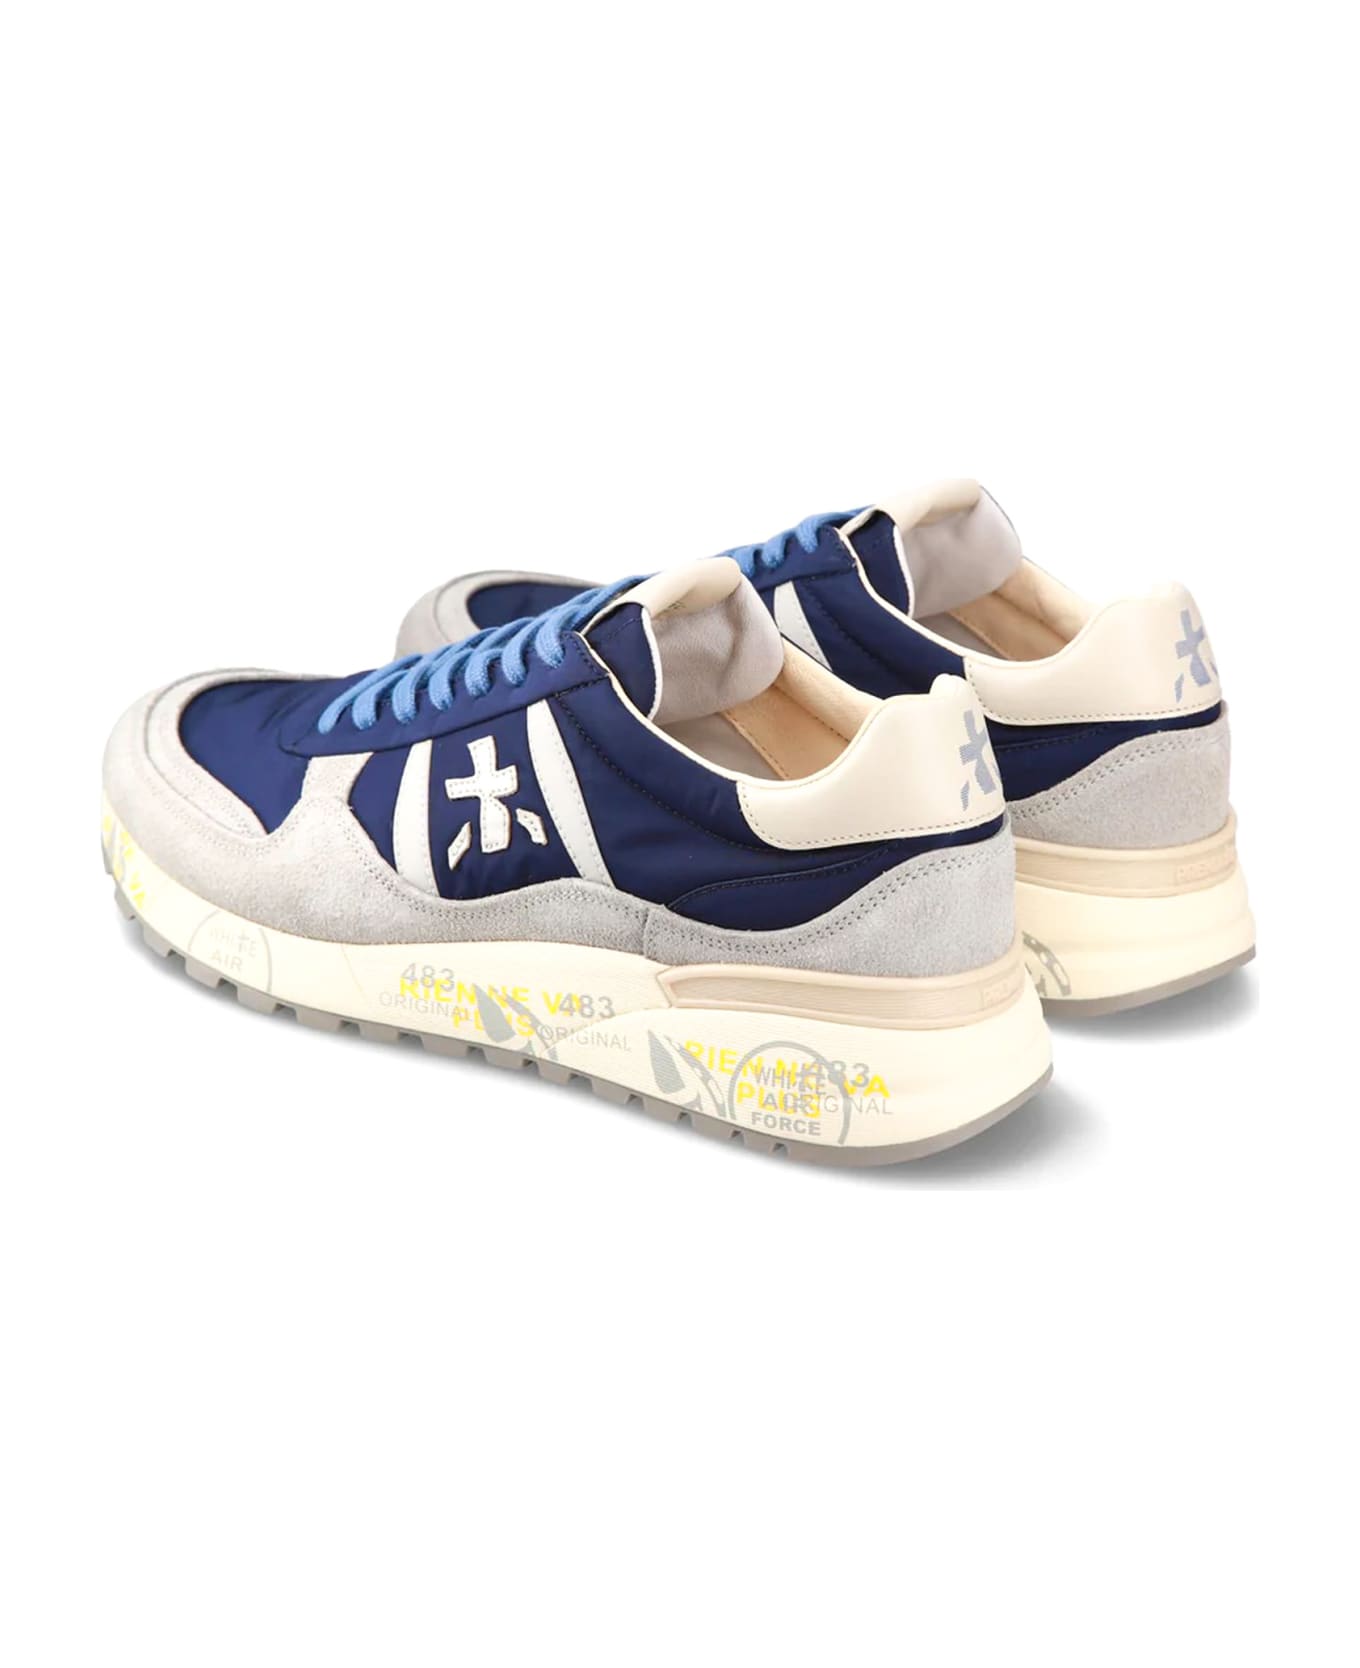 Premiata Landeck Sneakers In Blue Suede And Fabric - Blue/grey スニーカー